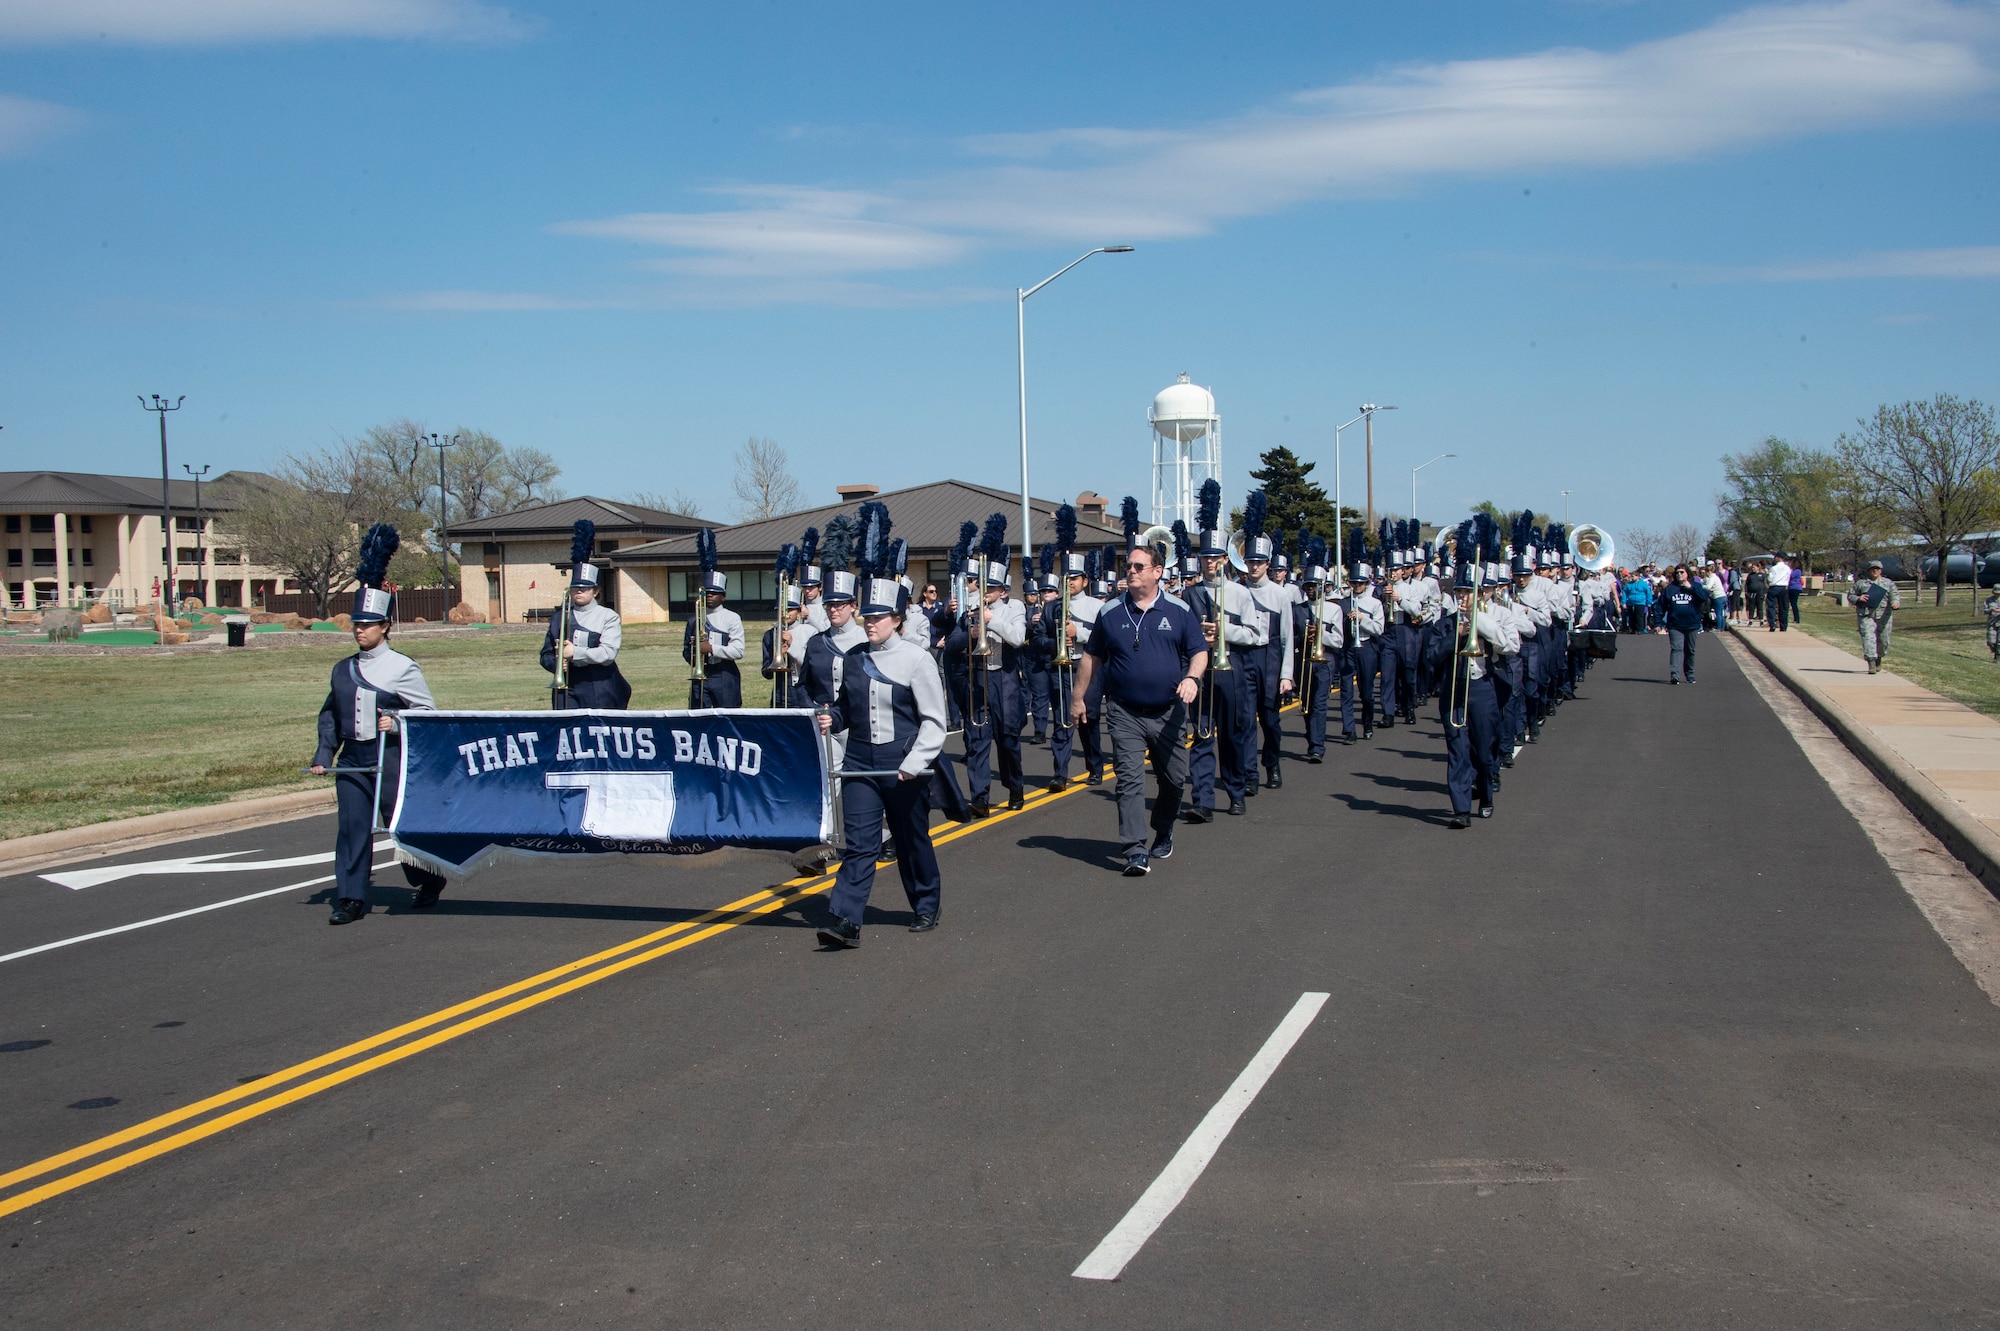 Members of the Altus High School “That Altus Band” march on the road, April 1, 2019, at Altus Air Force Base, Okla. The band helped celebrate the start of the Month of the Military Child. (U.S. Air Force photo by Senior Airman Cody Dowell)